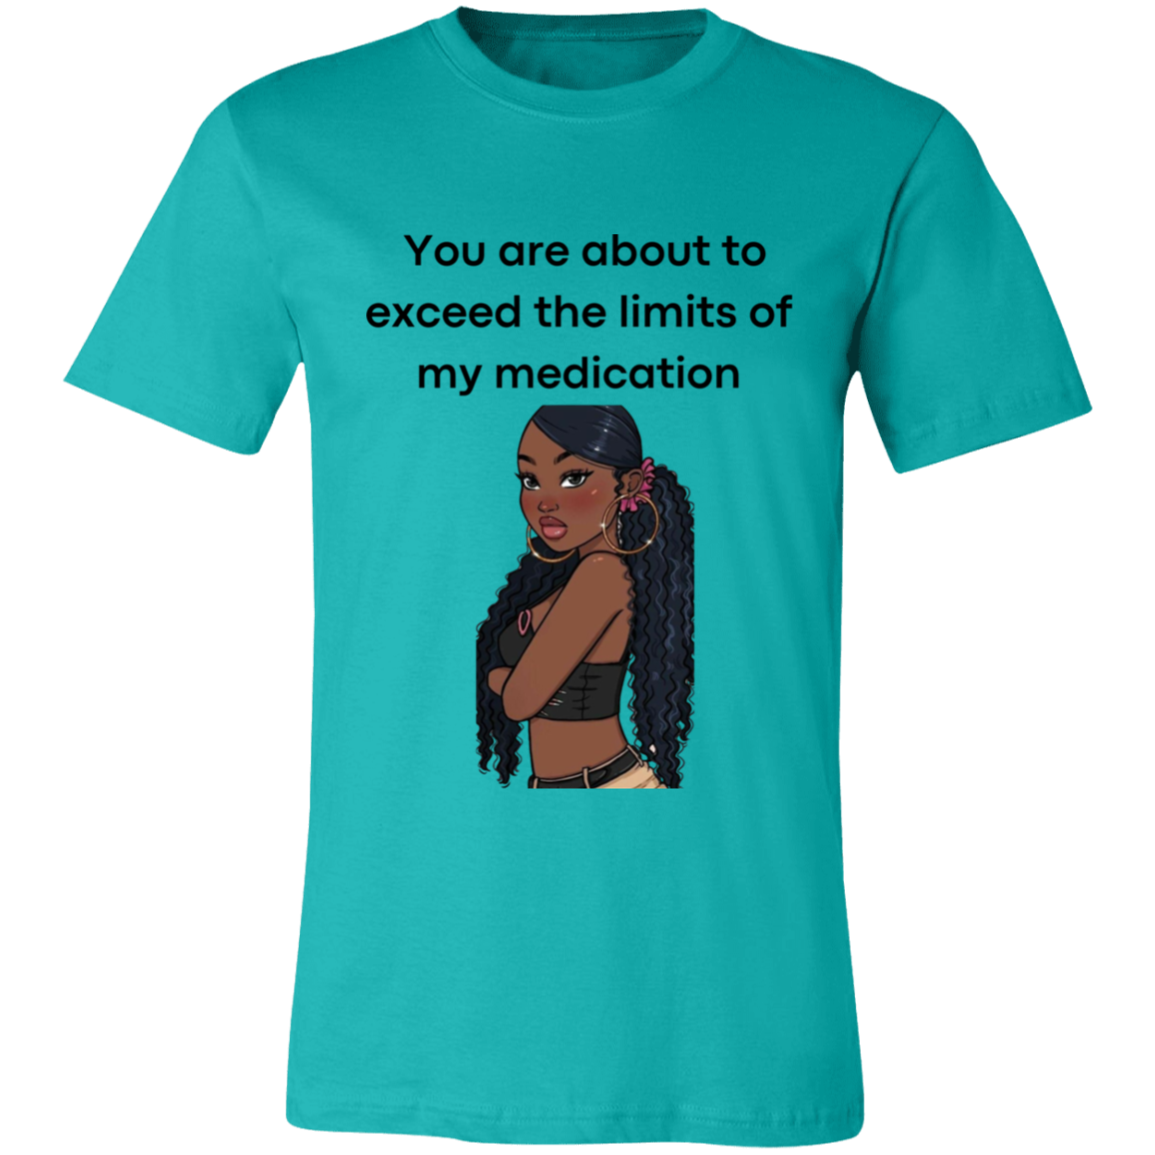 You Are About to Exceed the Limits of My Medication Ladies' Jersey Short-Sleeve T-Shirt